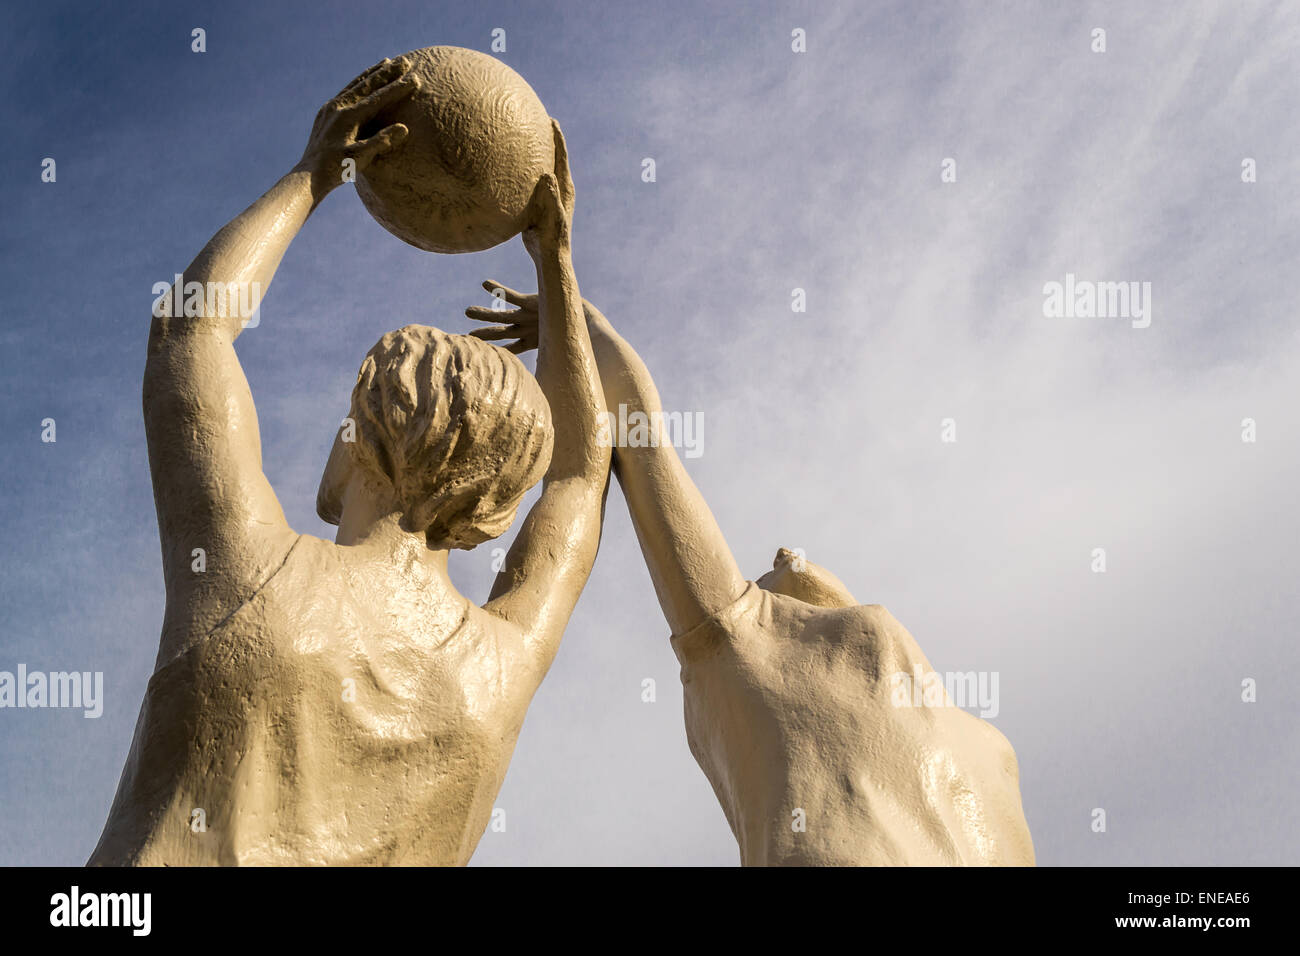 White stone statue of two women playing netball against a blue sky Stock Photo